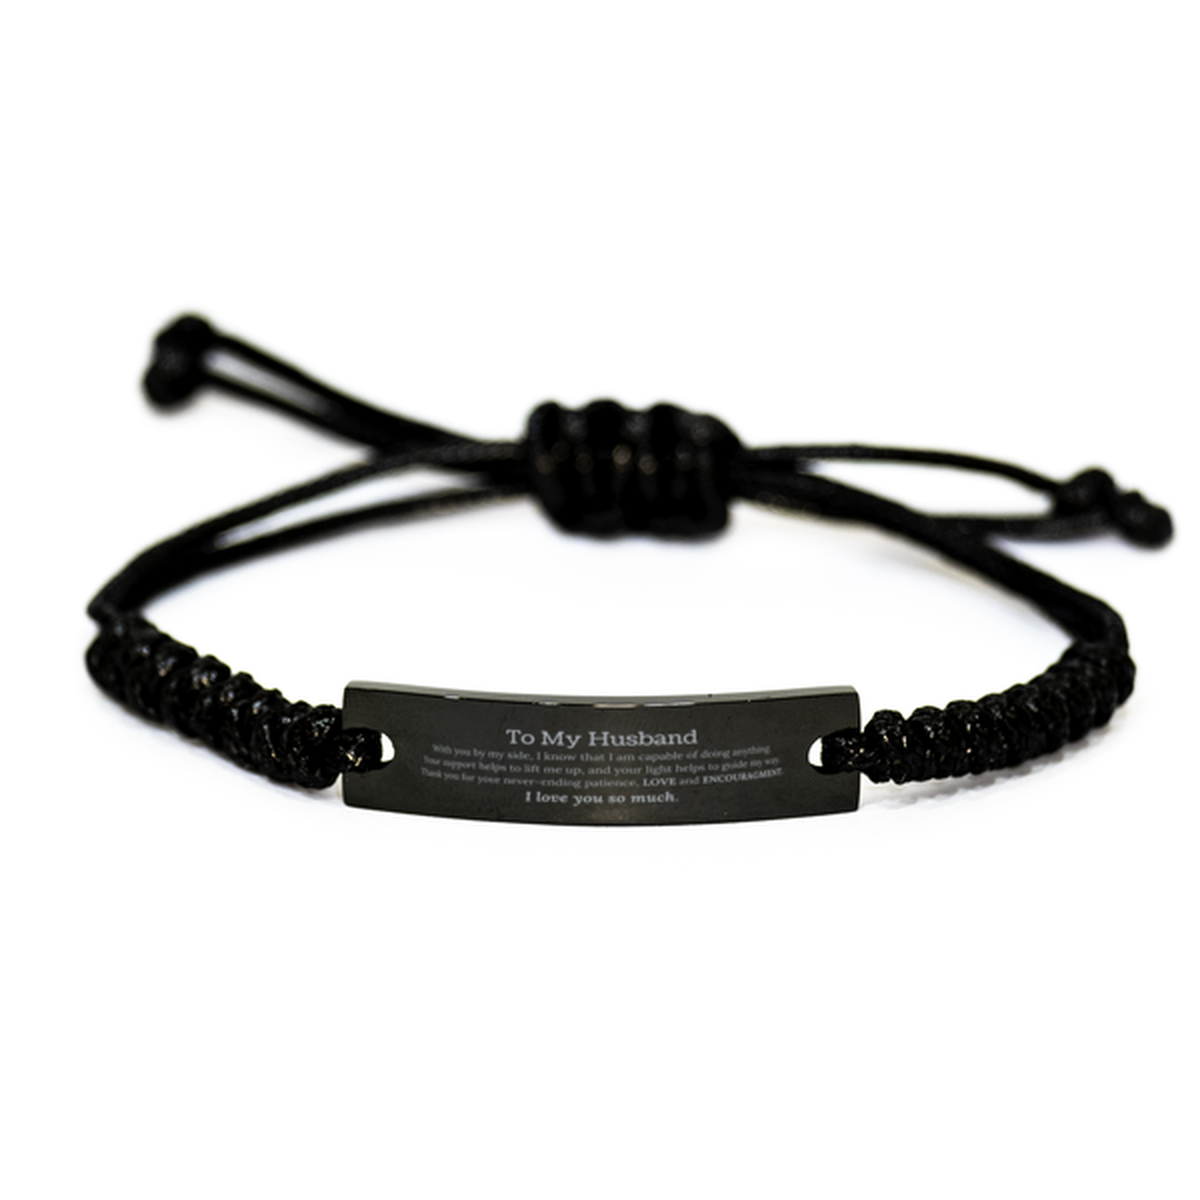 Appreciation Husband Black Rope Bracelet Gifts, To My Husband Birthday Christmas Wedding Keepsake Gifts for Husband With you by my side, I know that I am capable of doing anything. I love you so much